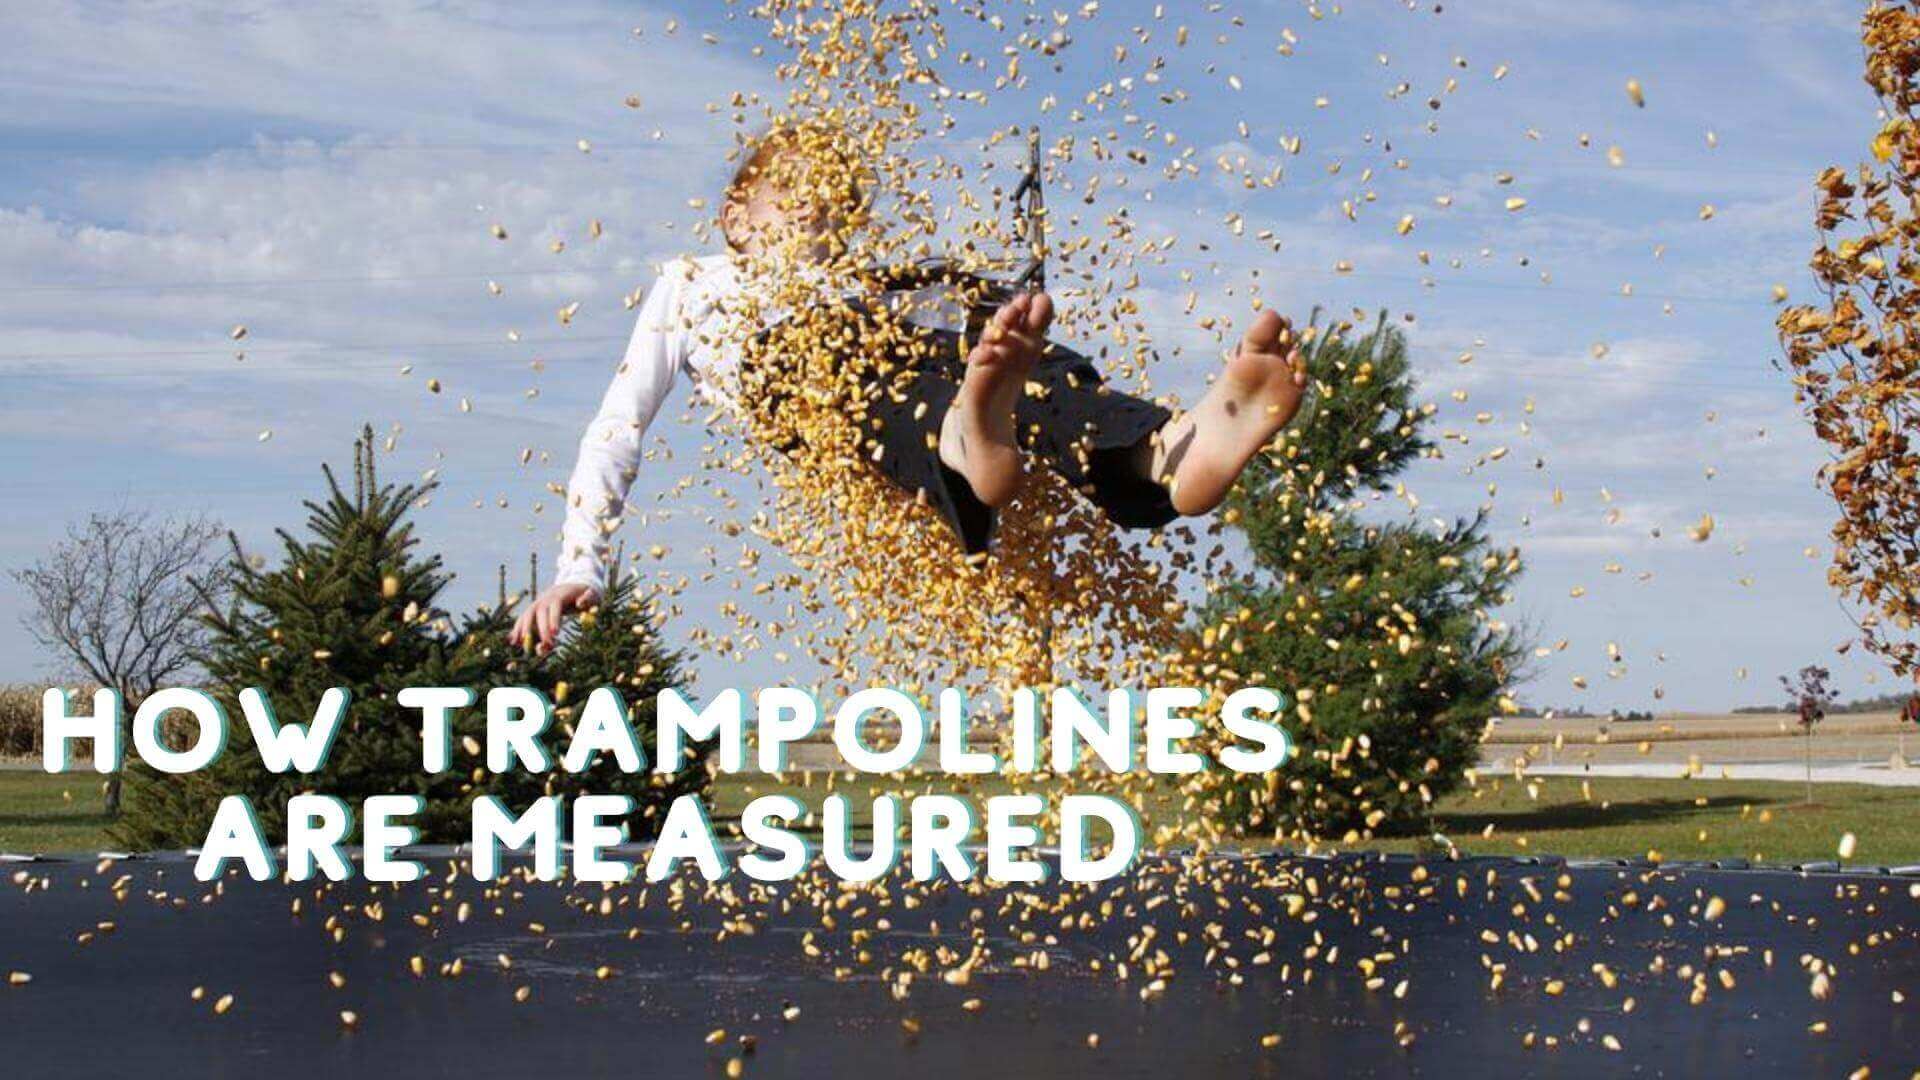 How trampolines are measured